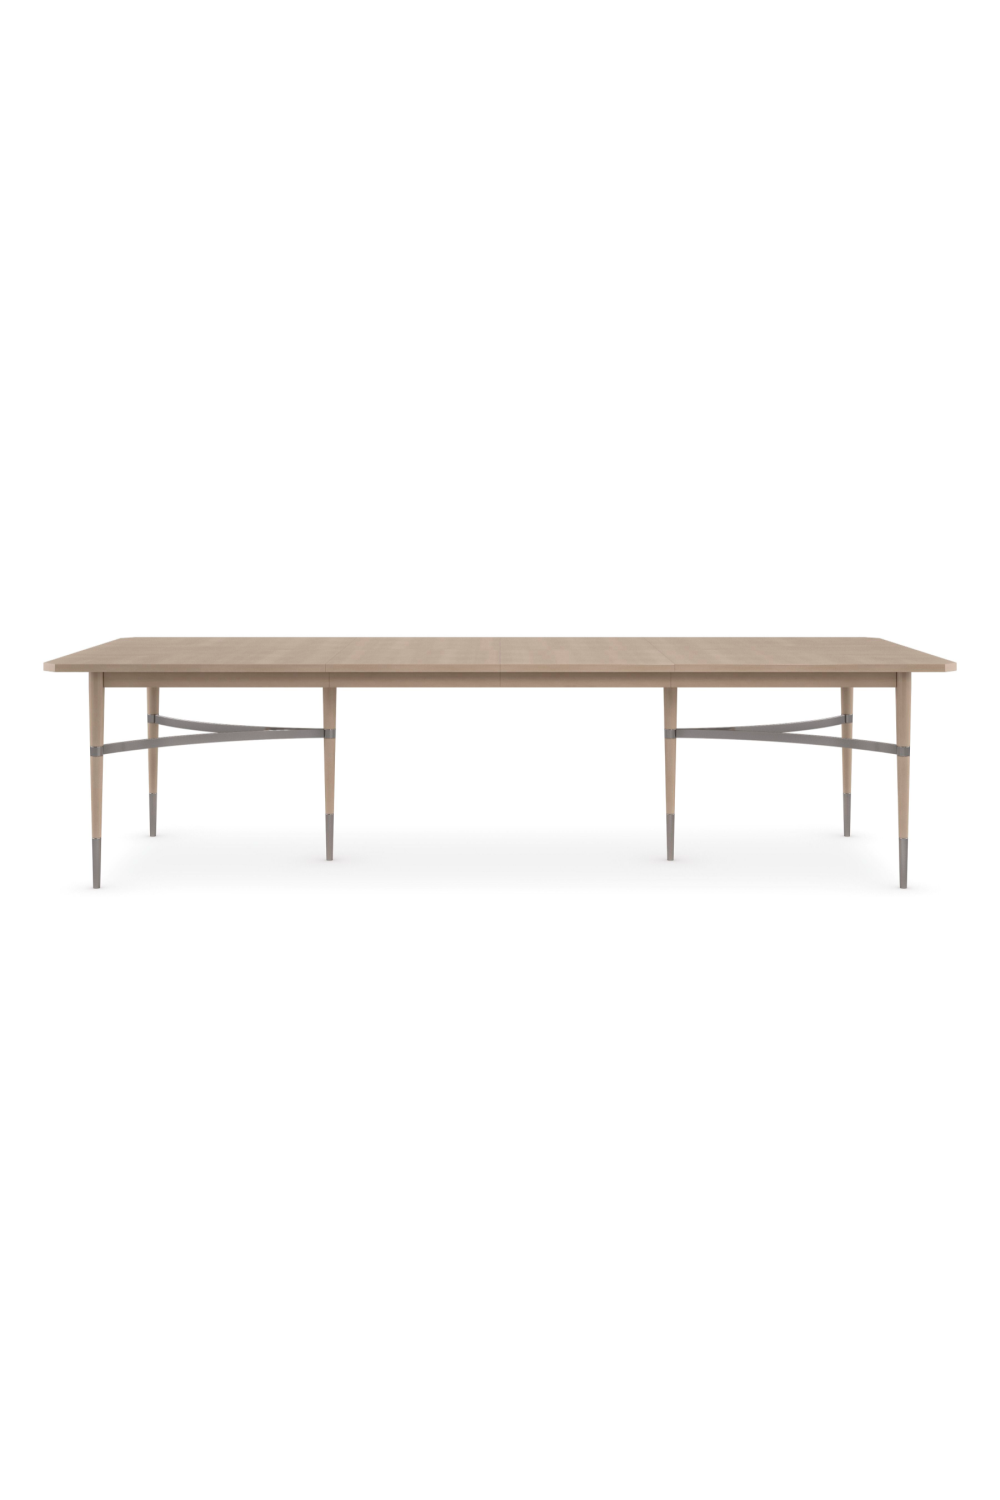 Beige Extendable Dining Table | Caracole Here to Accommodate | Oroa.com